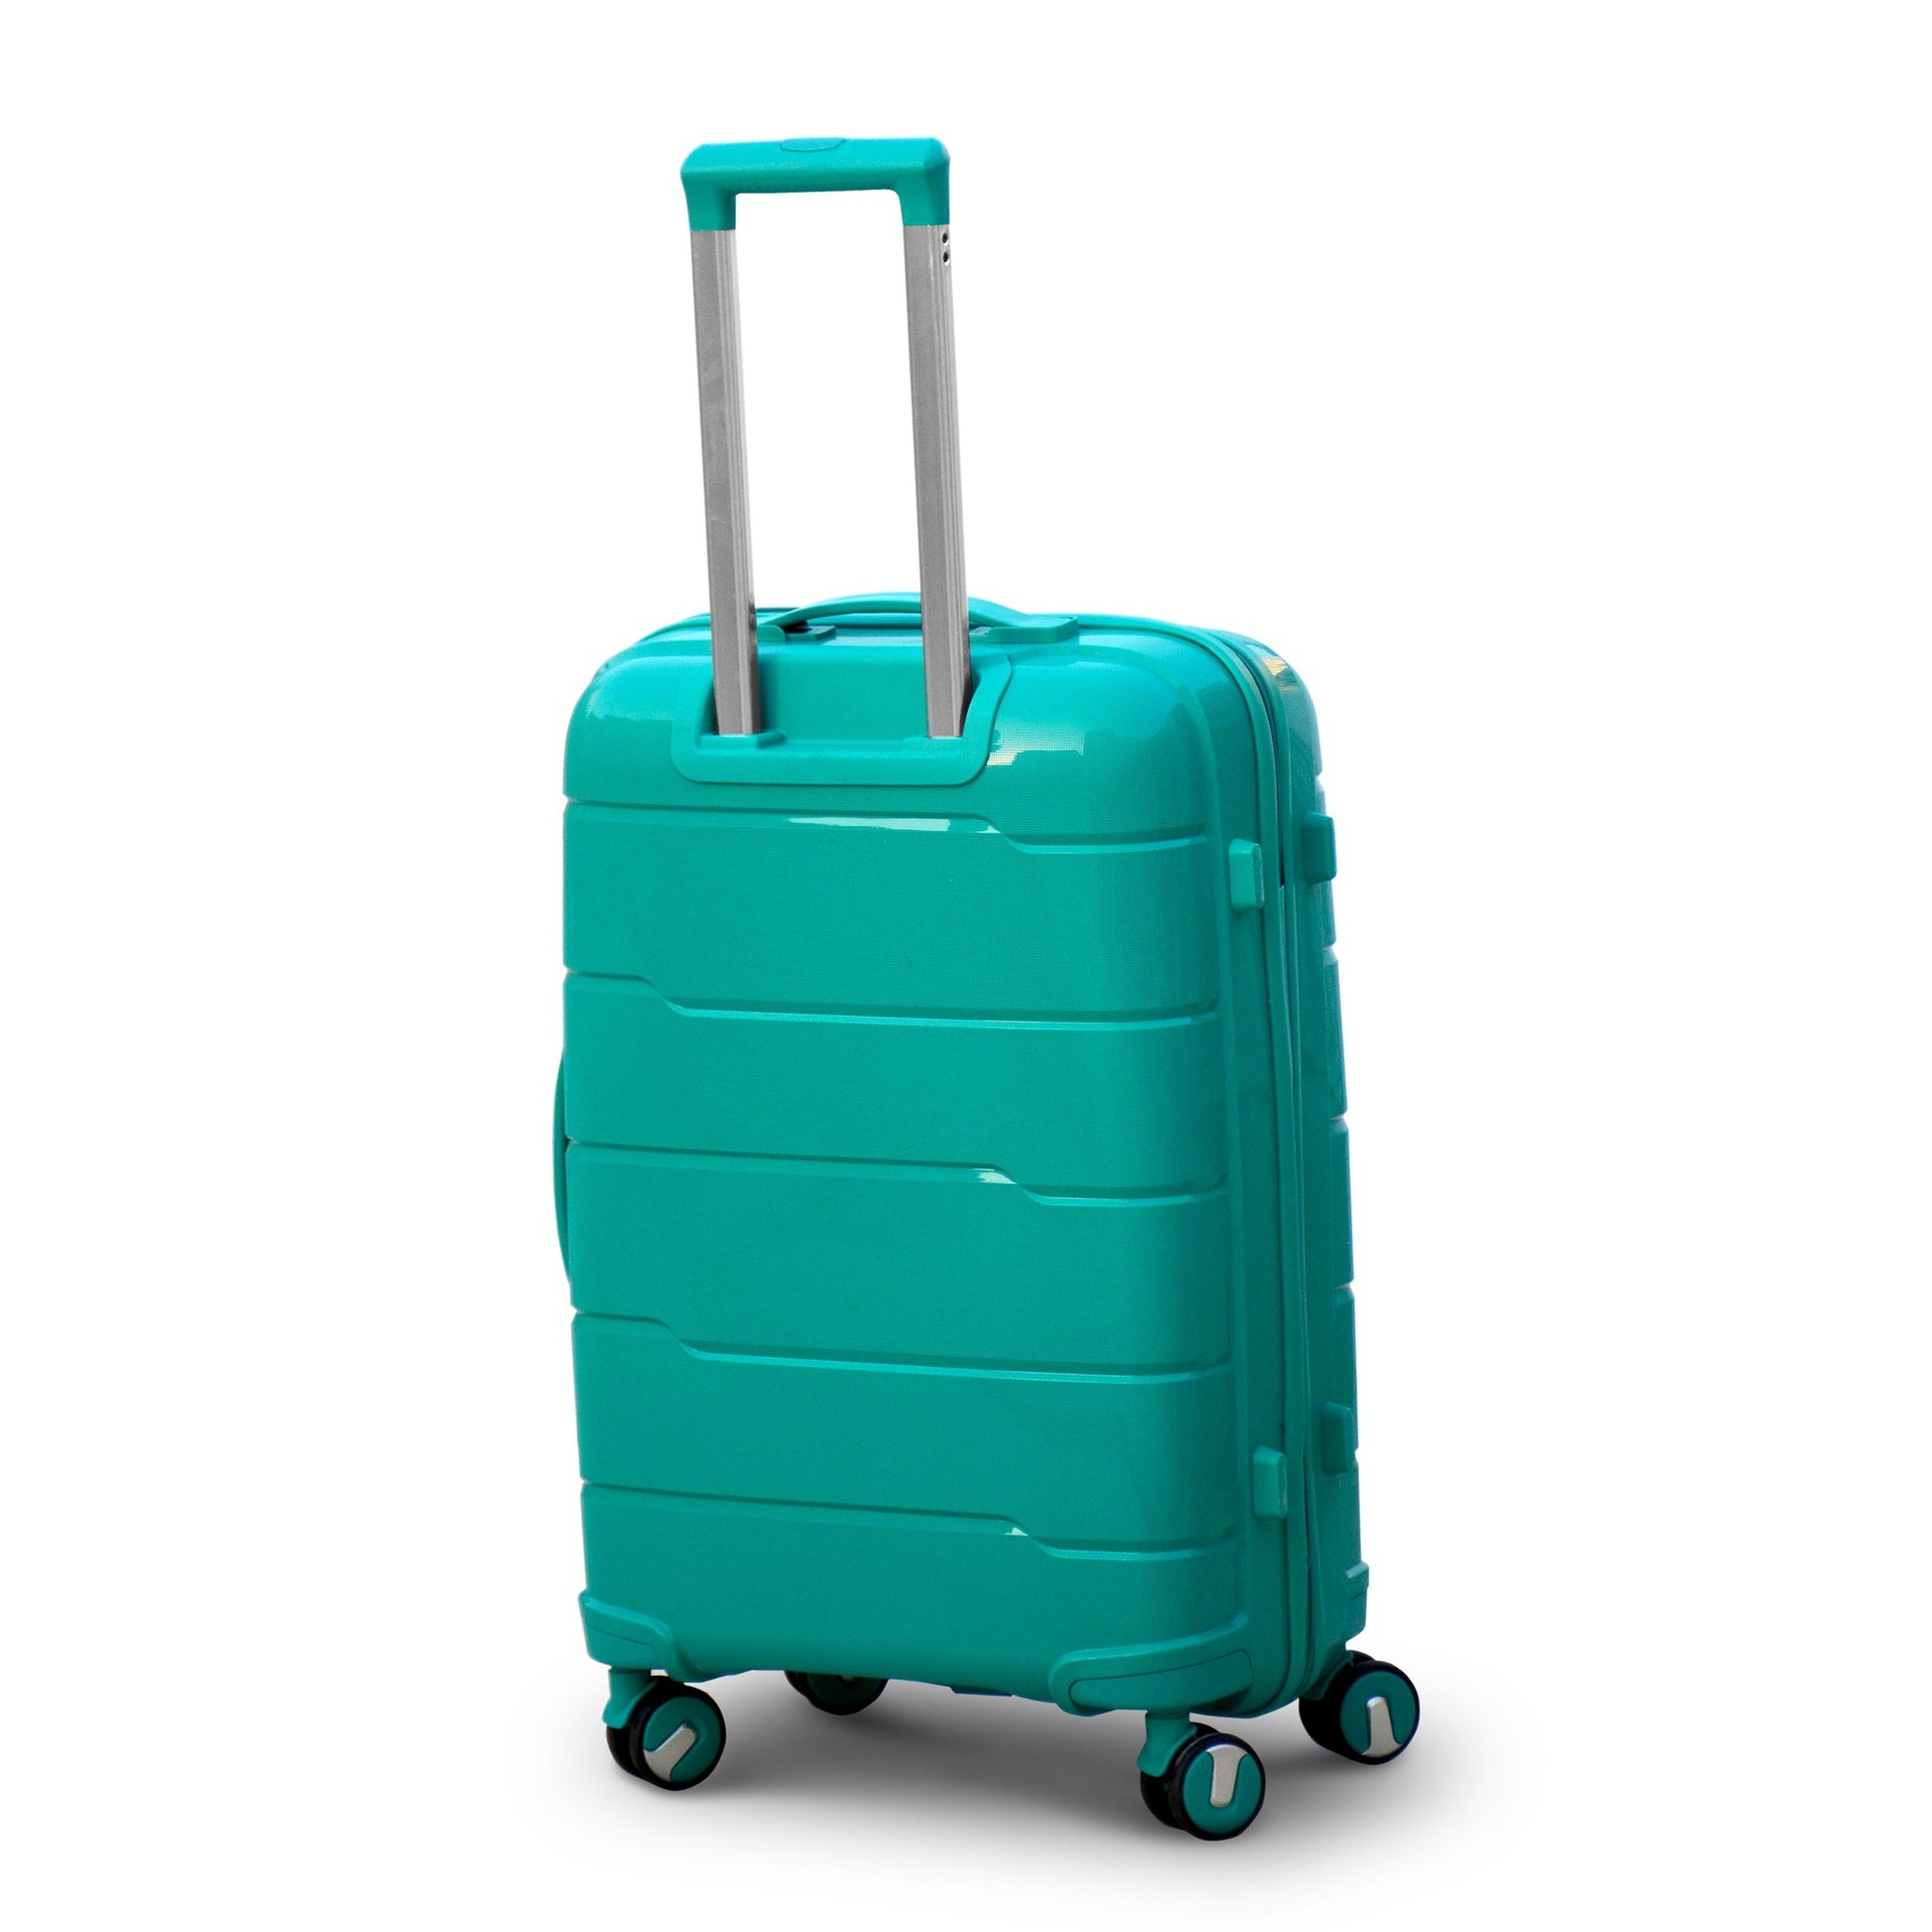 Flash Sale Offer | Carry On Luggage Bags 10 Kg Unbreakable PP Material Zaappy